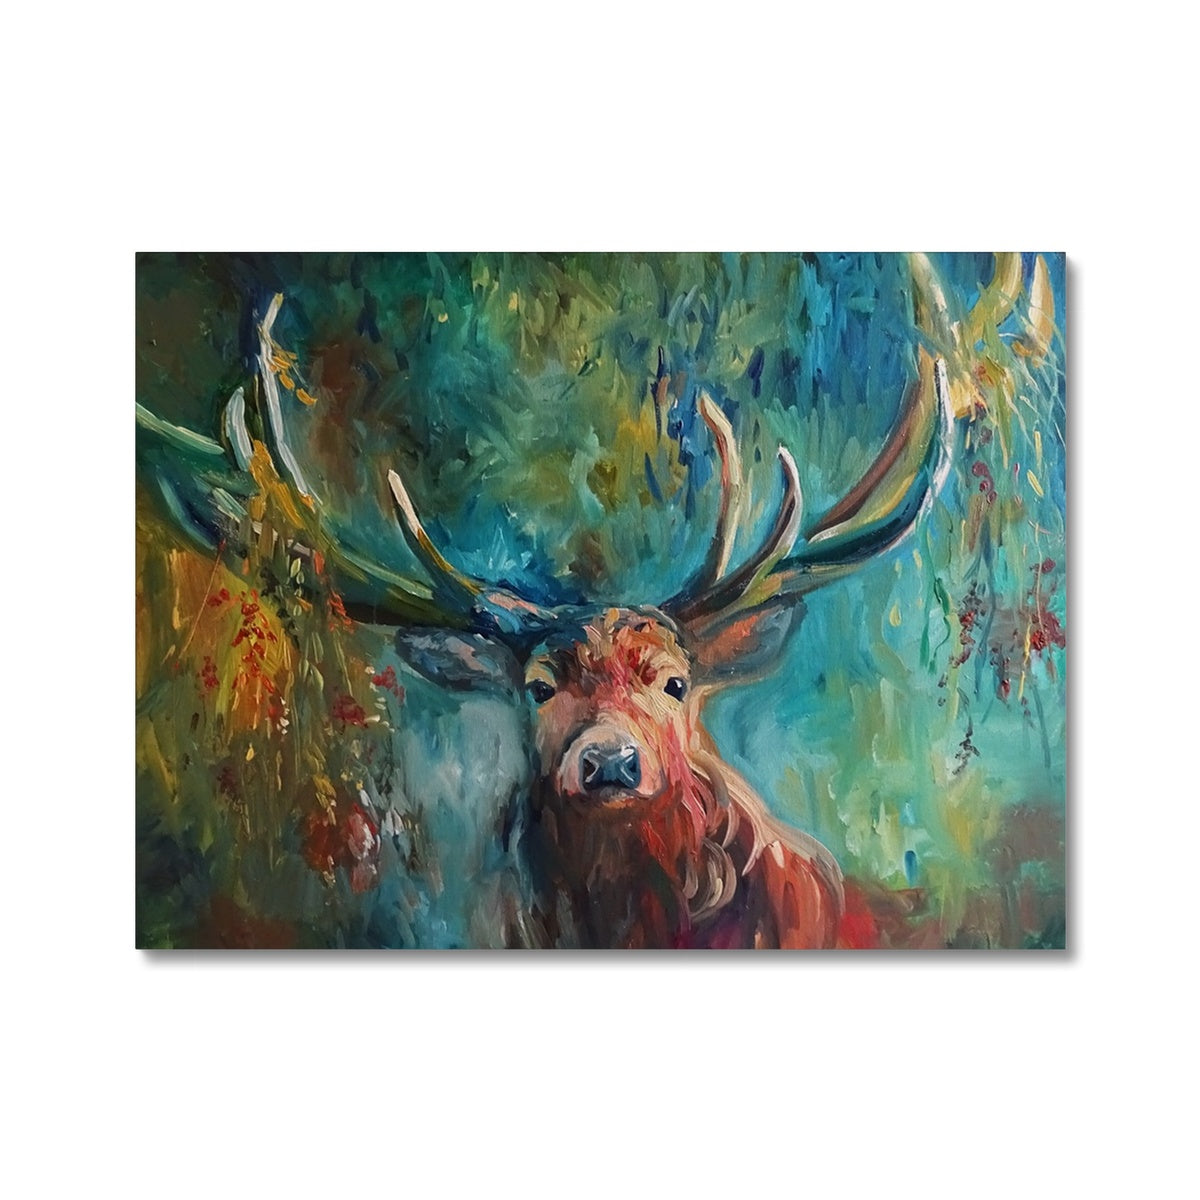 picture of a stag with woodland 